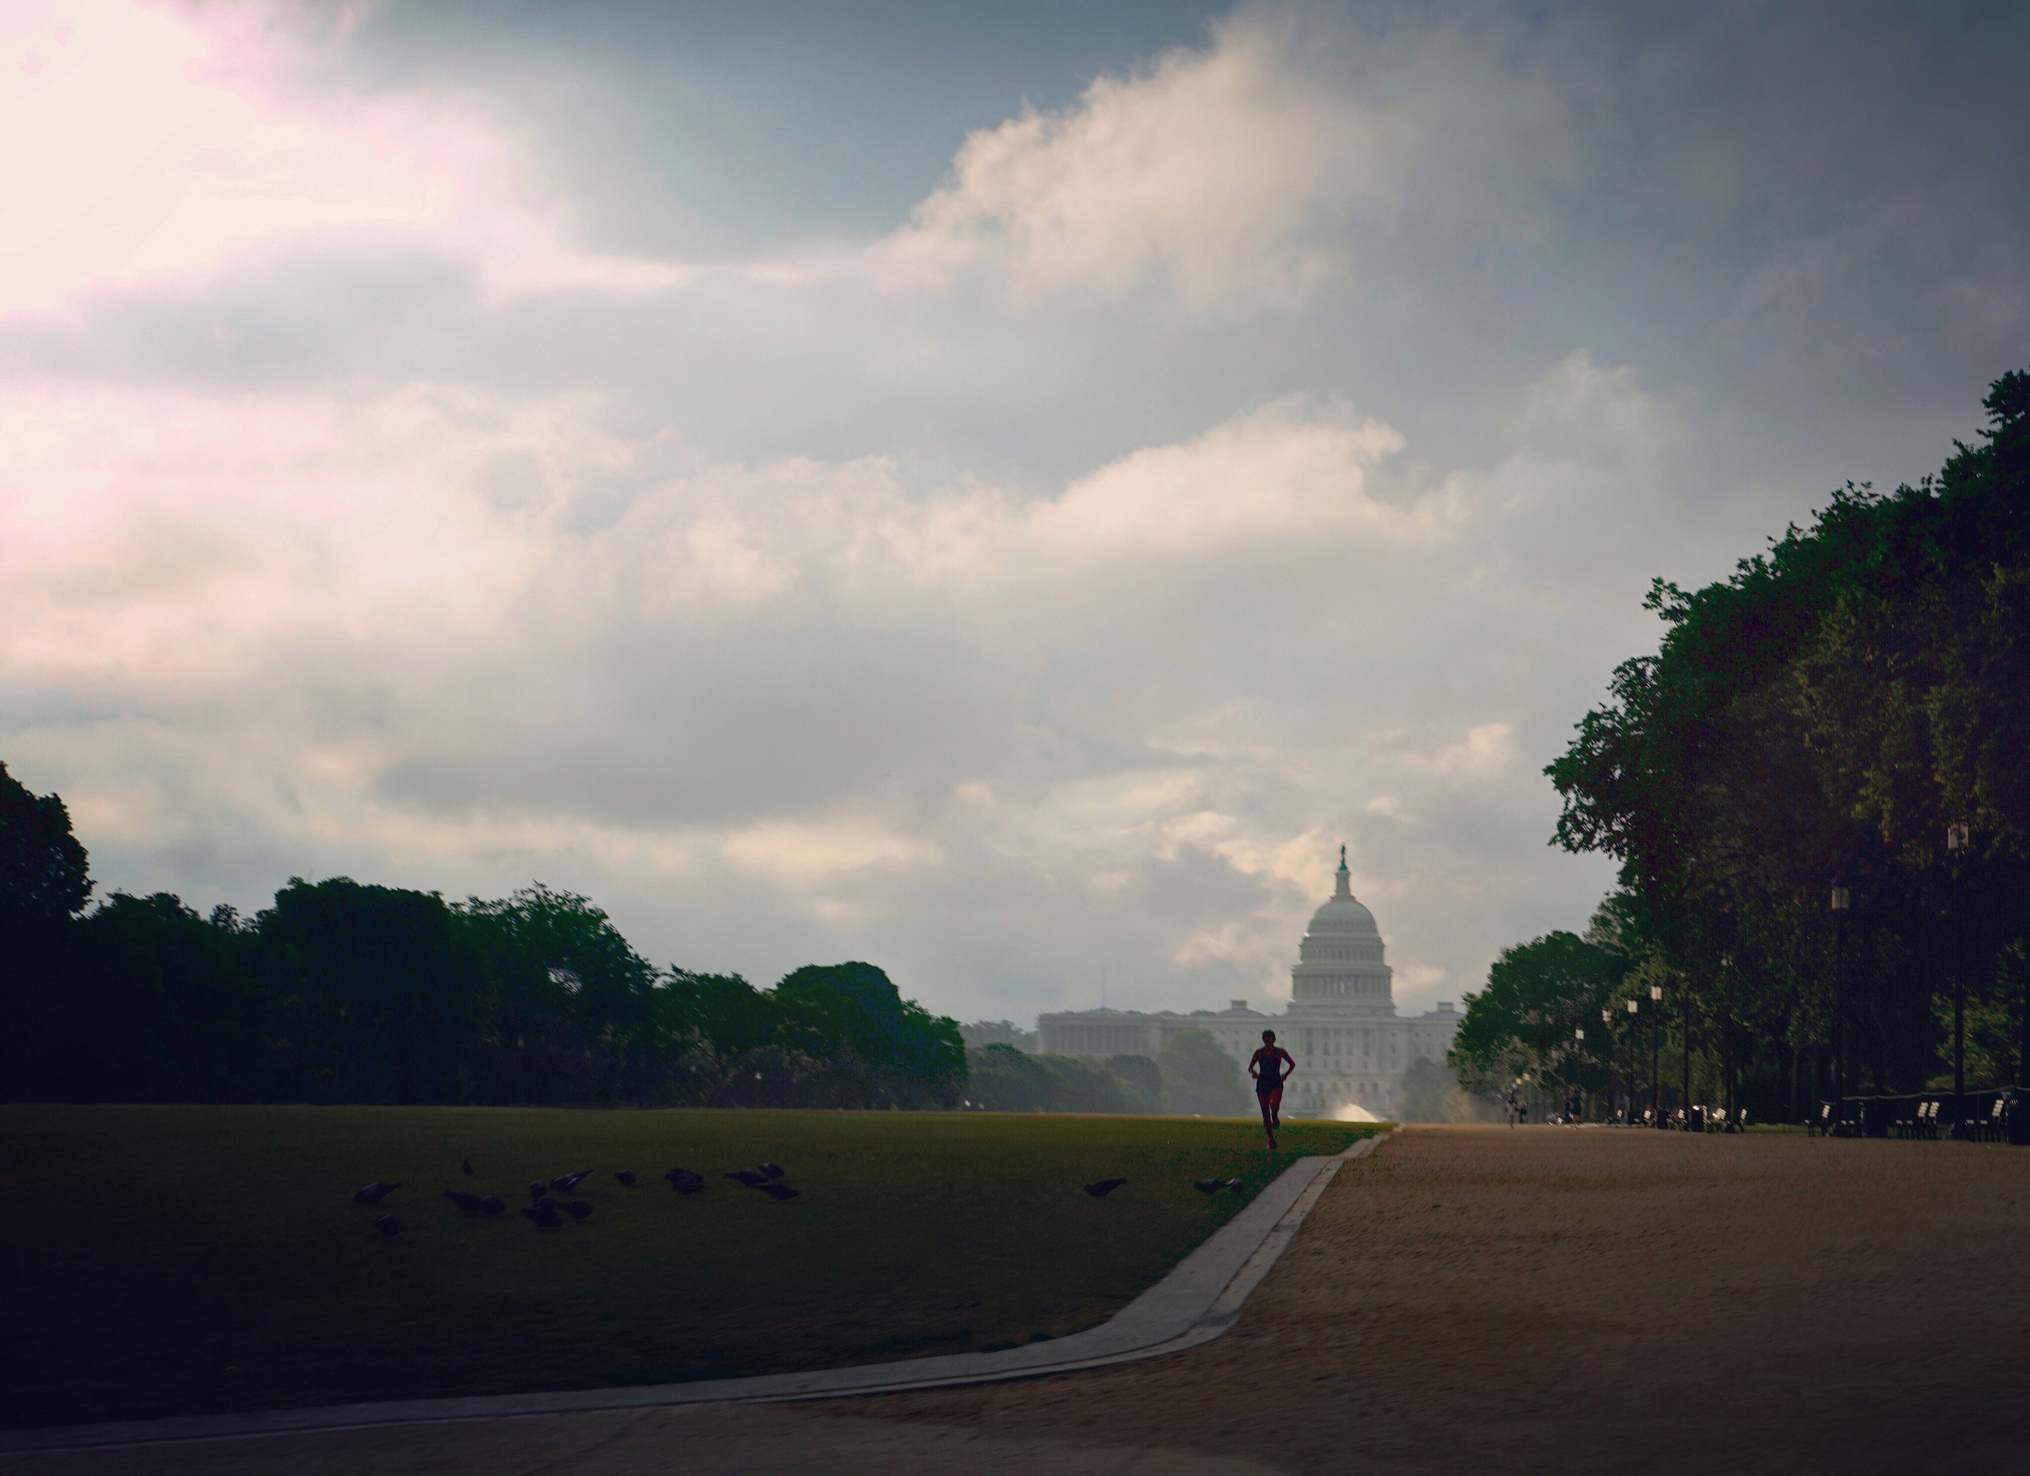 A man runs on a field against a cloudy sky, with the United States Capitol in the background.